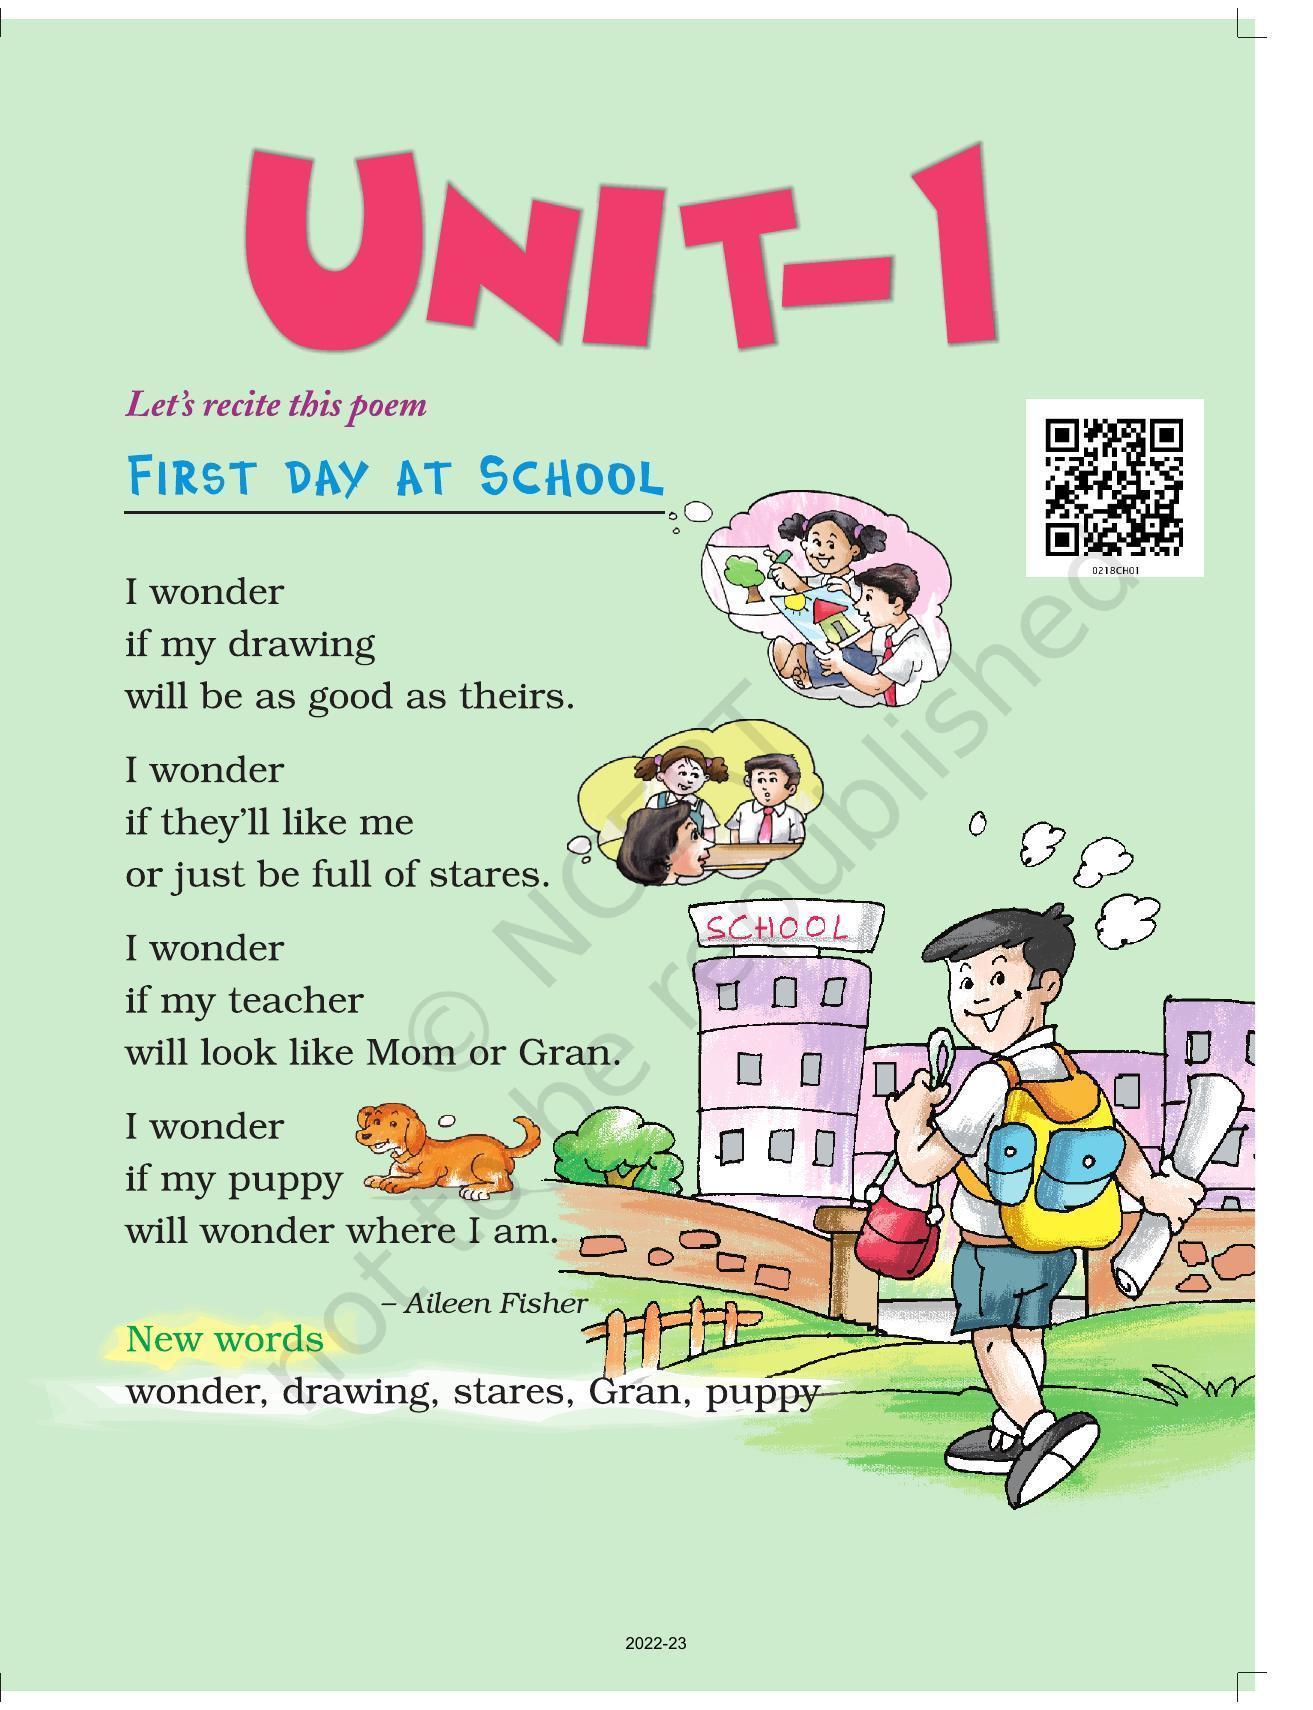 ncert-book-for-class-2-english-marigold-chapter-1-first-day-at-school